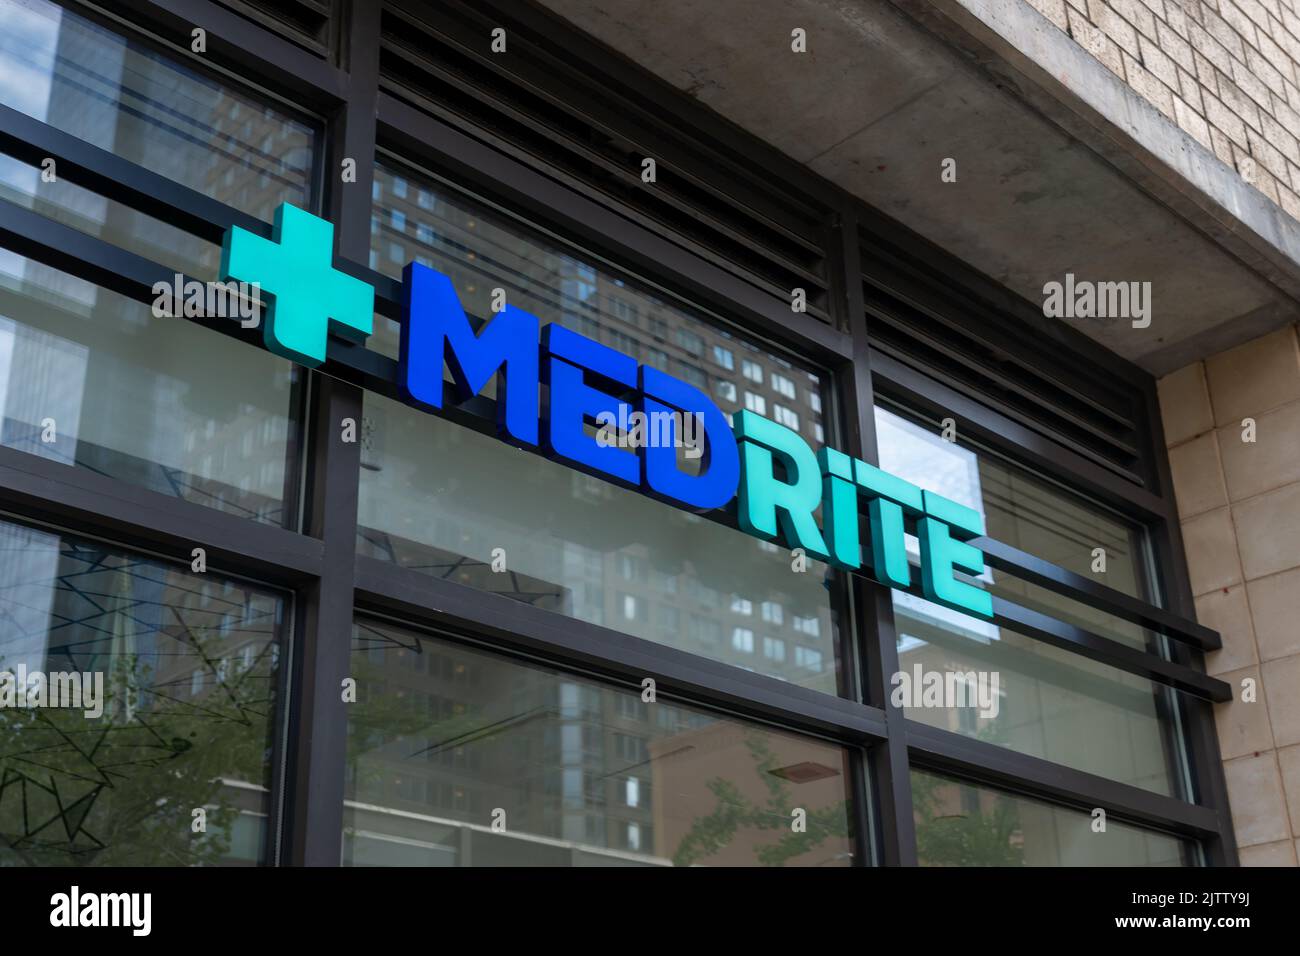 New York City, NY, USA - August 20, 2022: A MedRite sign on the building in New York City, NY, USA. Stock Photo